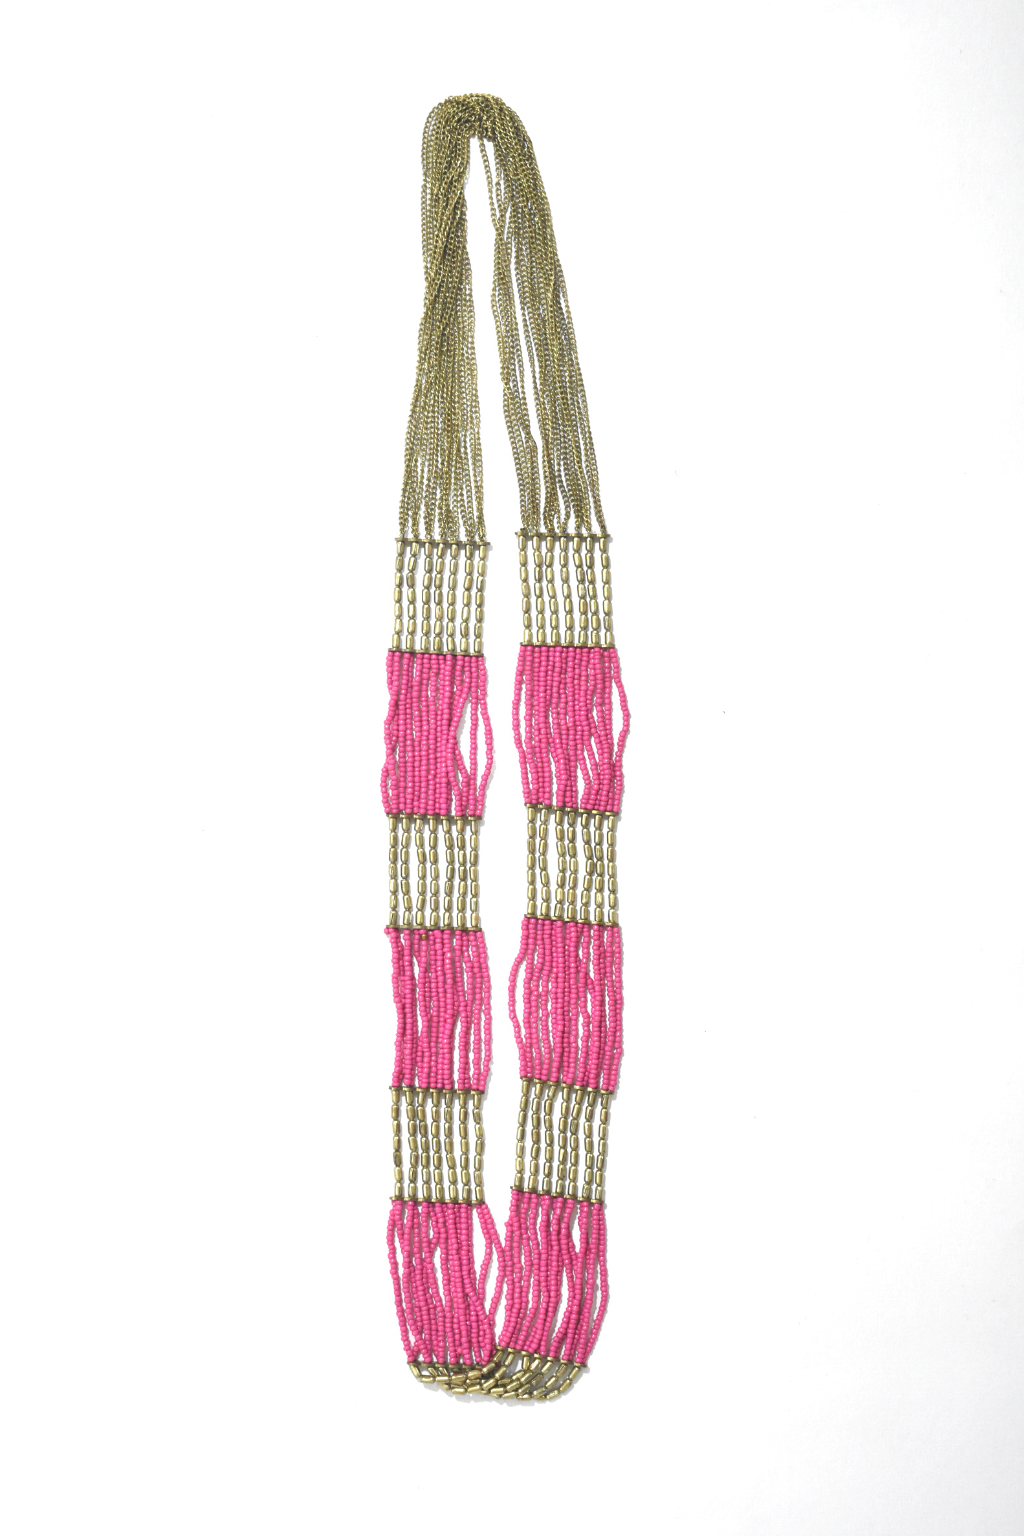 Pink Beads & Lace Necklace - Vita Isola